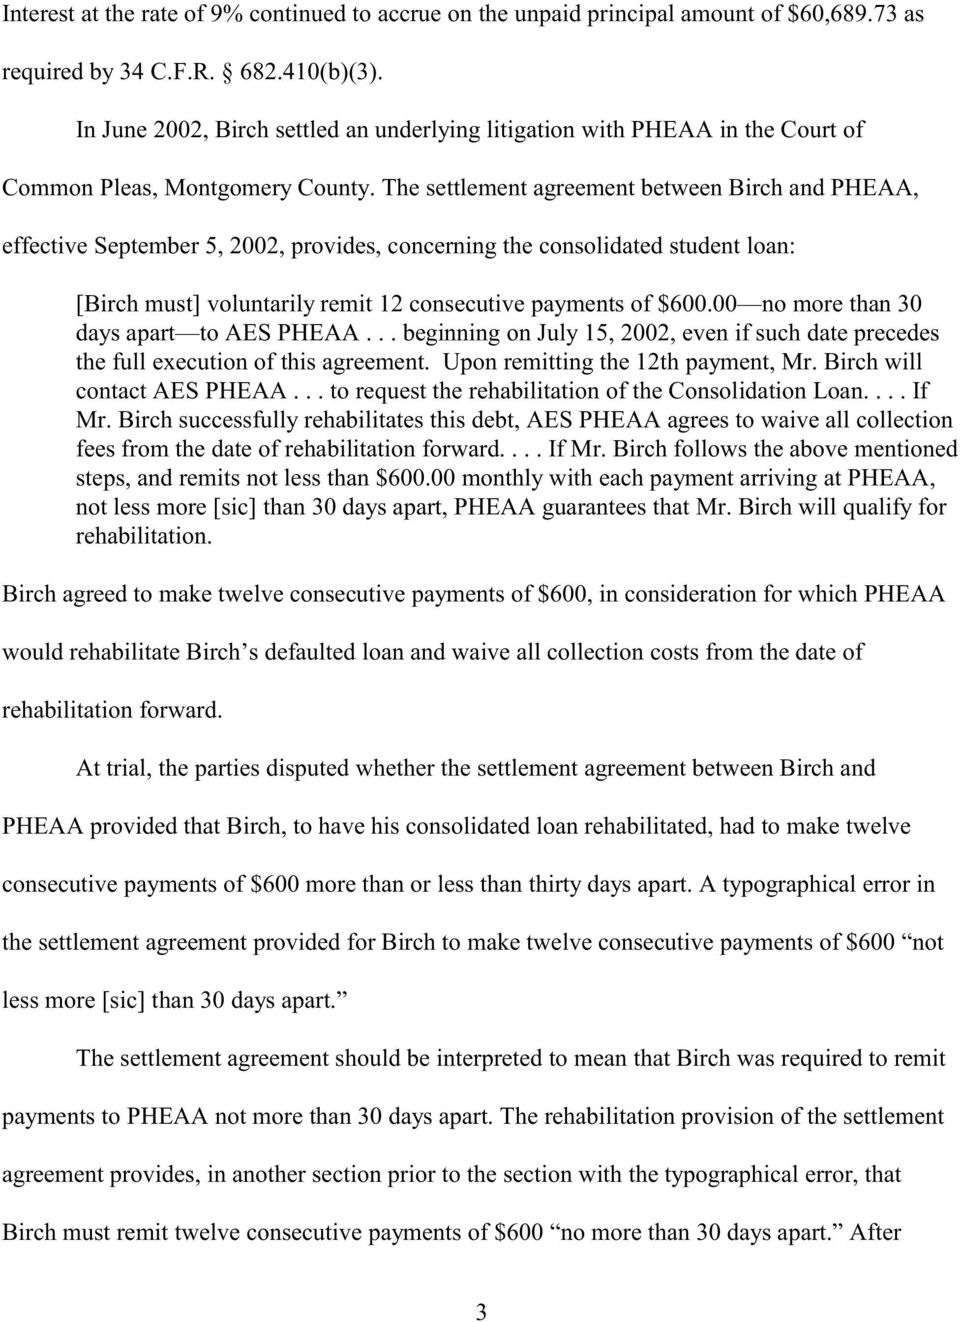 The settlement agreement between Birch and PHEAA, effective September 5, 2002, provides, concerning the consolidated student loan [Birch must] voluntarily remit 12 consecutive payments of $600.